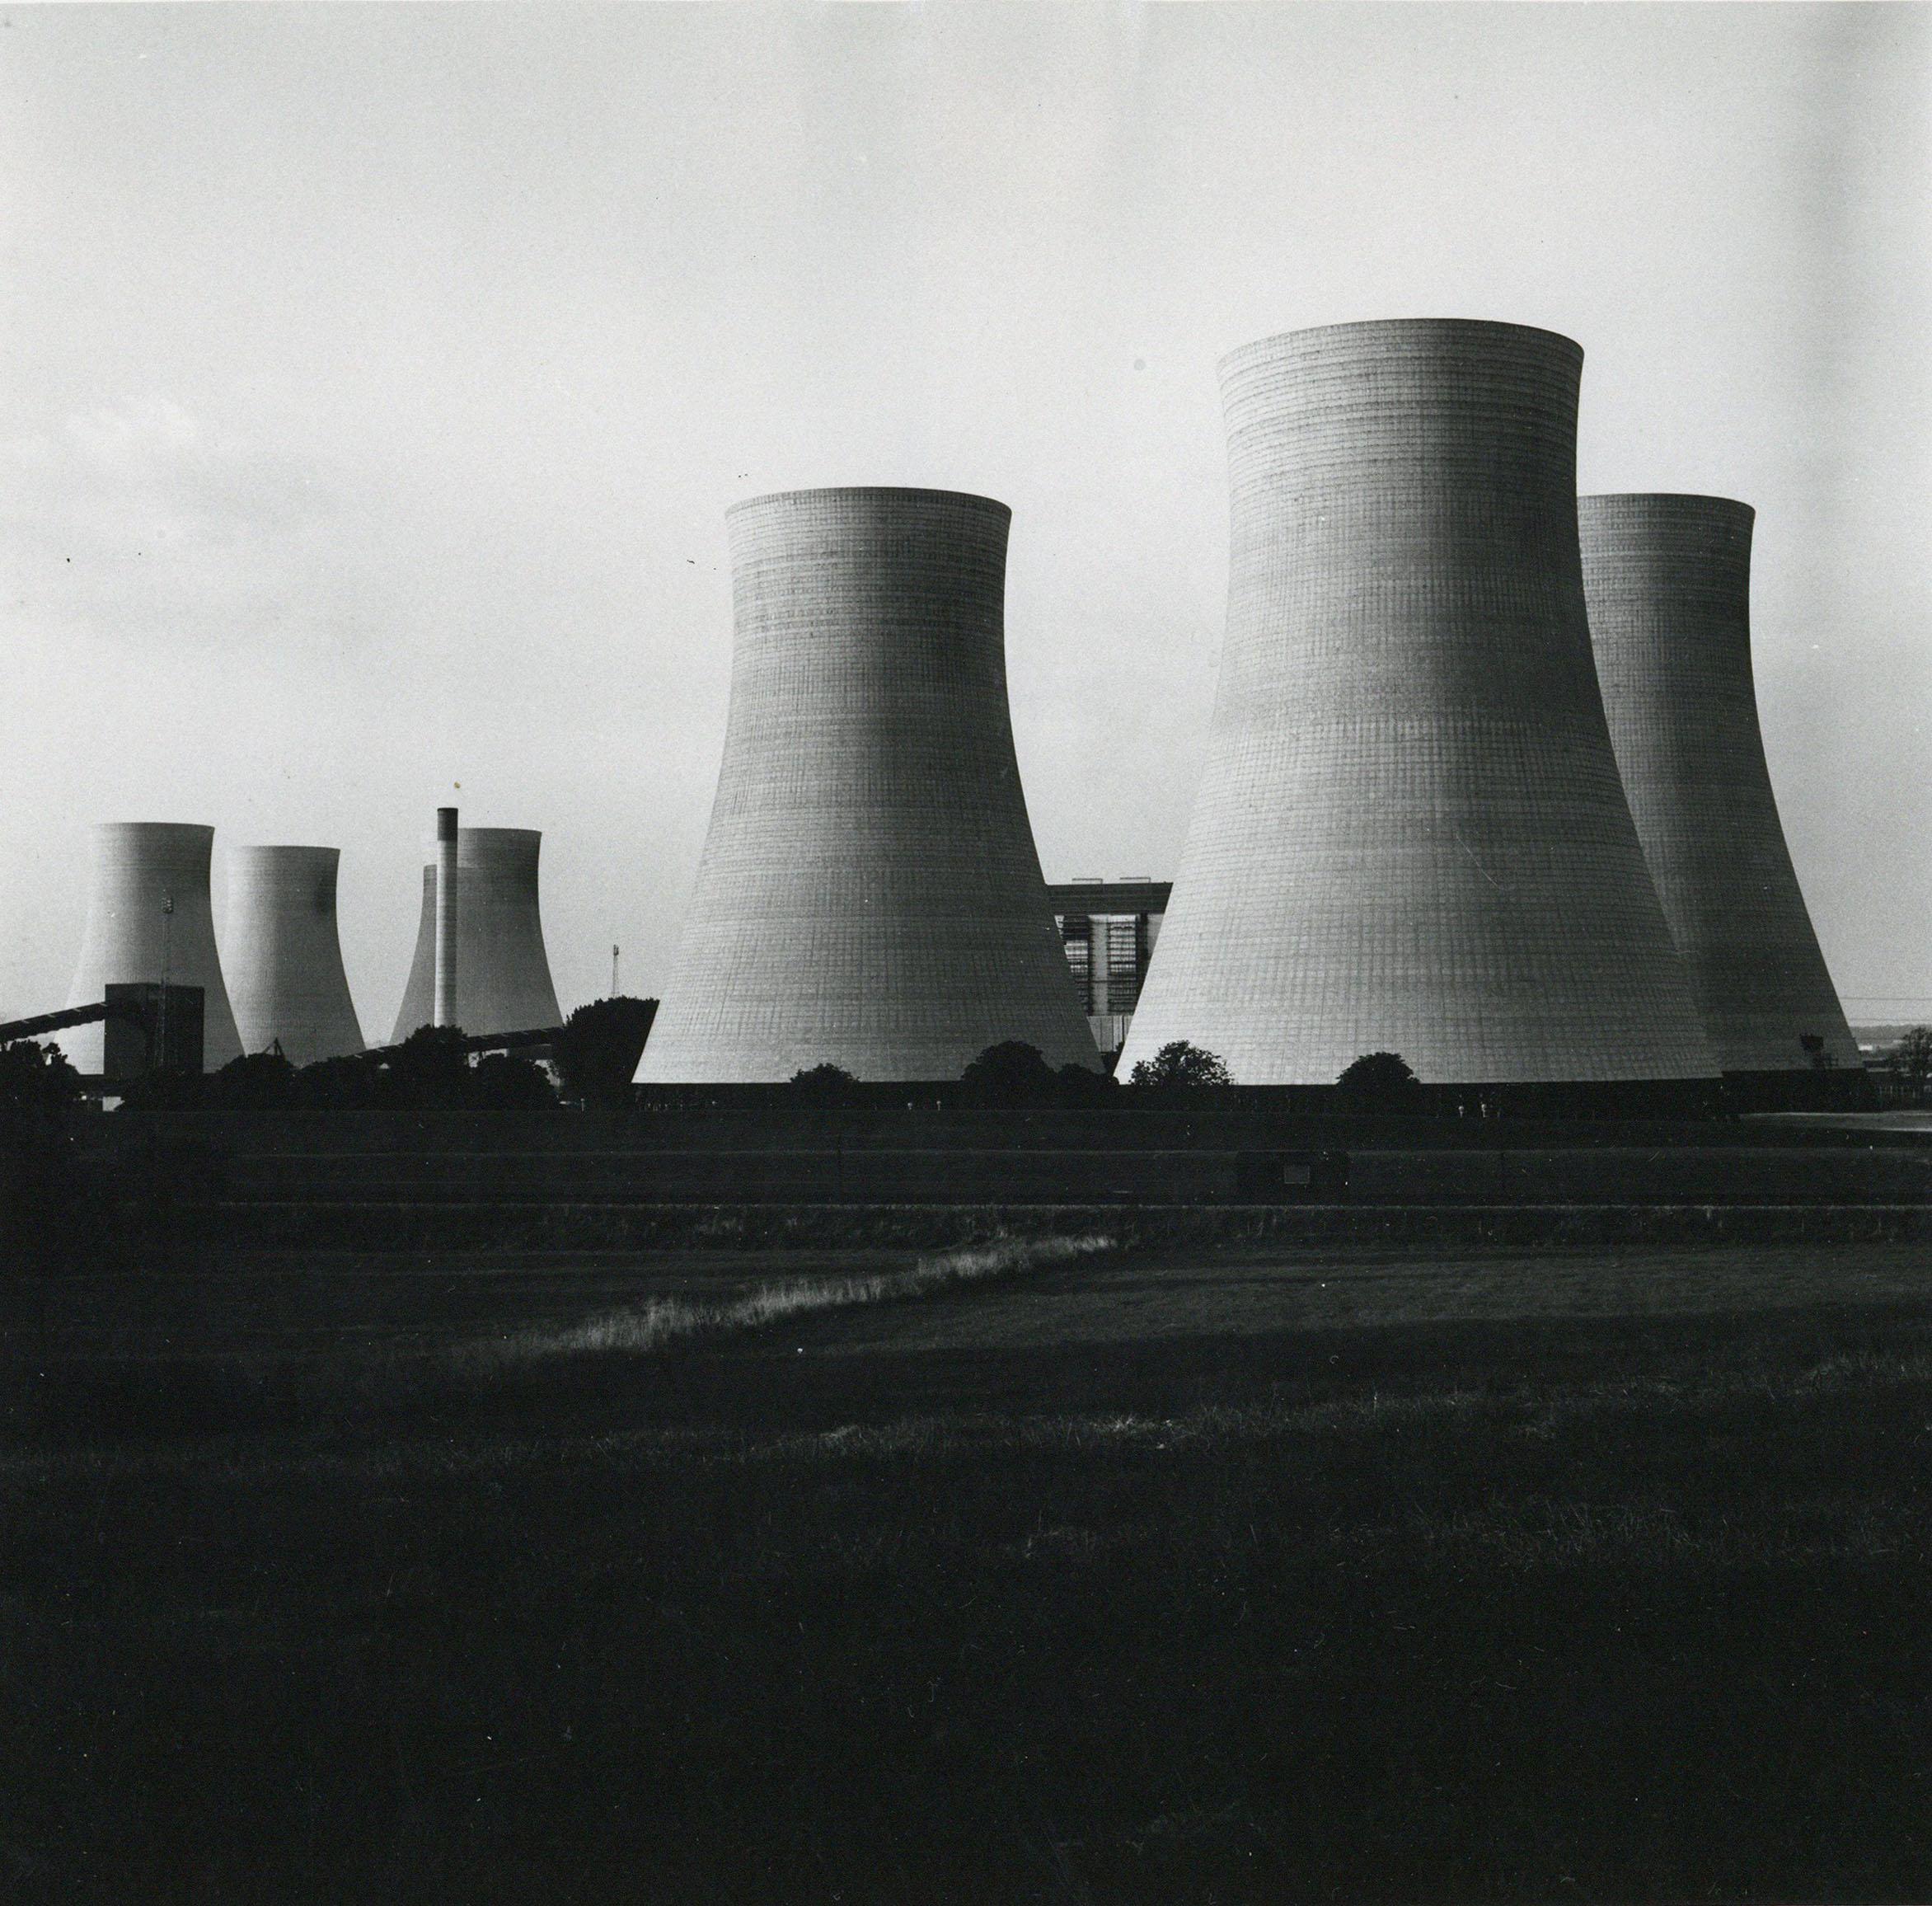 Rosemary Ellis (1910-1988)
Cooling Towers II
Original photography for Pipes and Wires in the Outlooks and Insights series published by Bodley Head, composed by Rosemary & Charlotte Ellis.
Silver Gelatin Print
13x13cm

Rosemary Ellis was well known